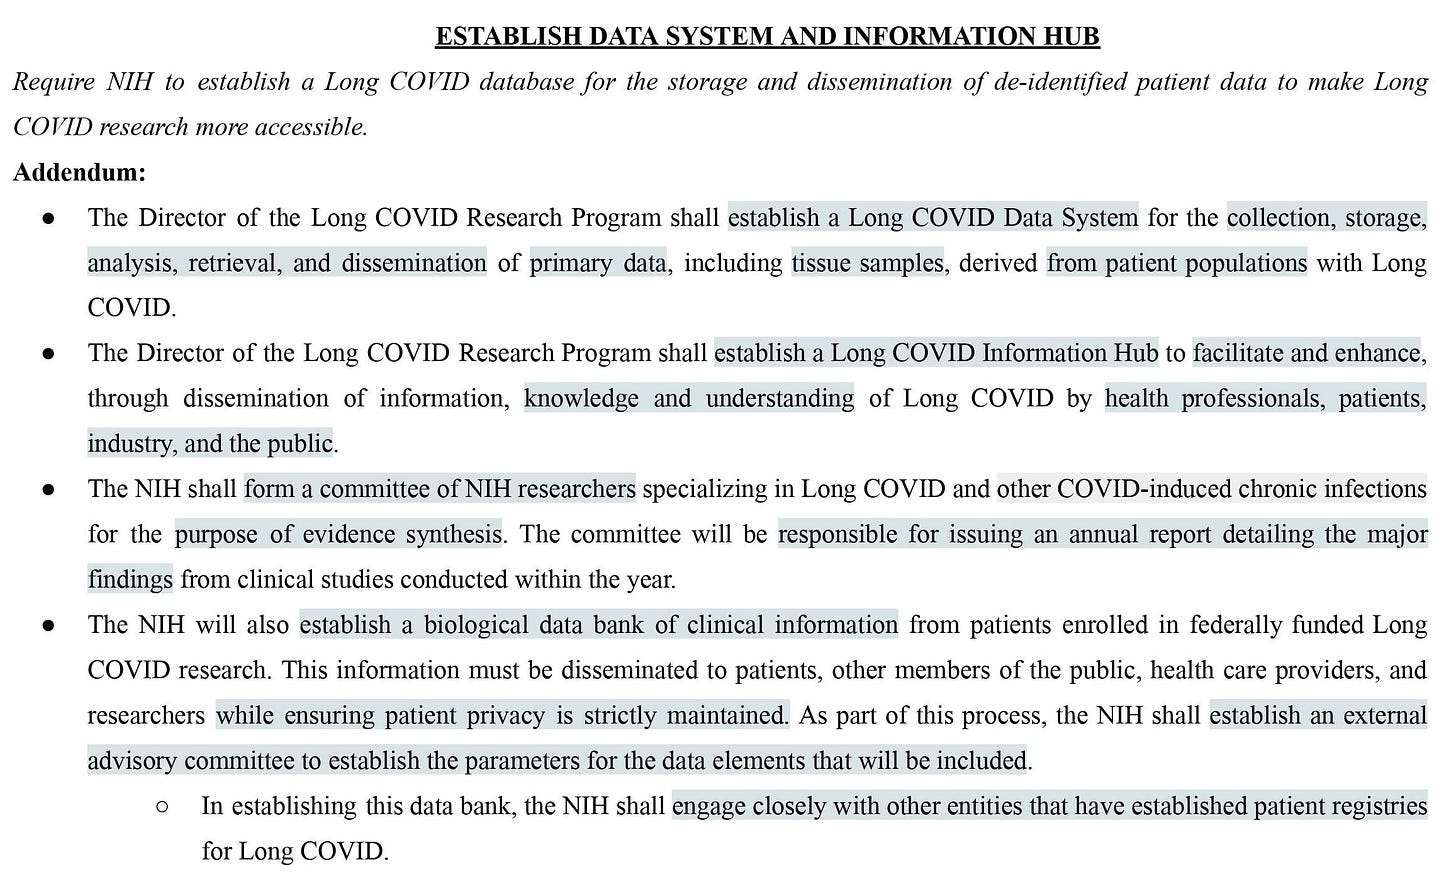 Proposal: Require NIH to establish a Long COVID database for the storage and dissemination of de-identified patient data to make Long COVID research more accessible.  Addendum:  ●  Establish a Data System for the collection, storage, analysis, retrieval, and dissemination of primary data, including tissue samples. ●  Establish an Information Hub to facilitate and enhance knowledge and understanding of Long COVID. 